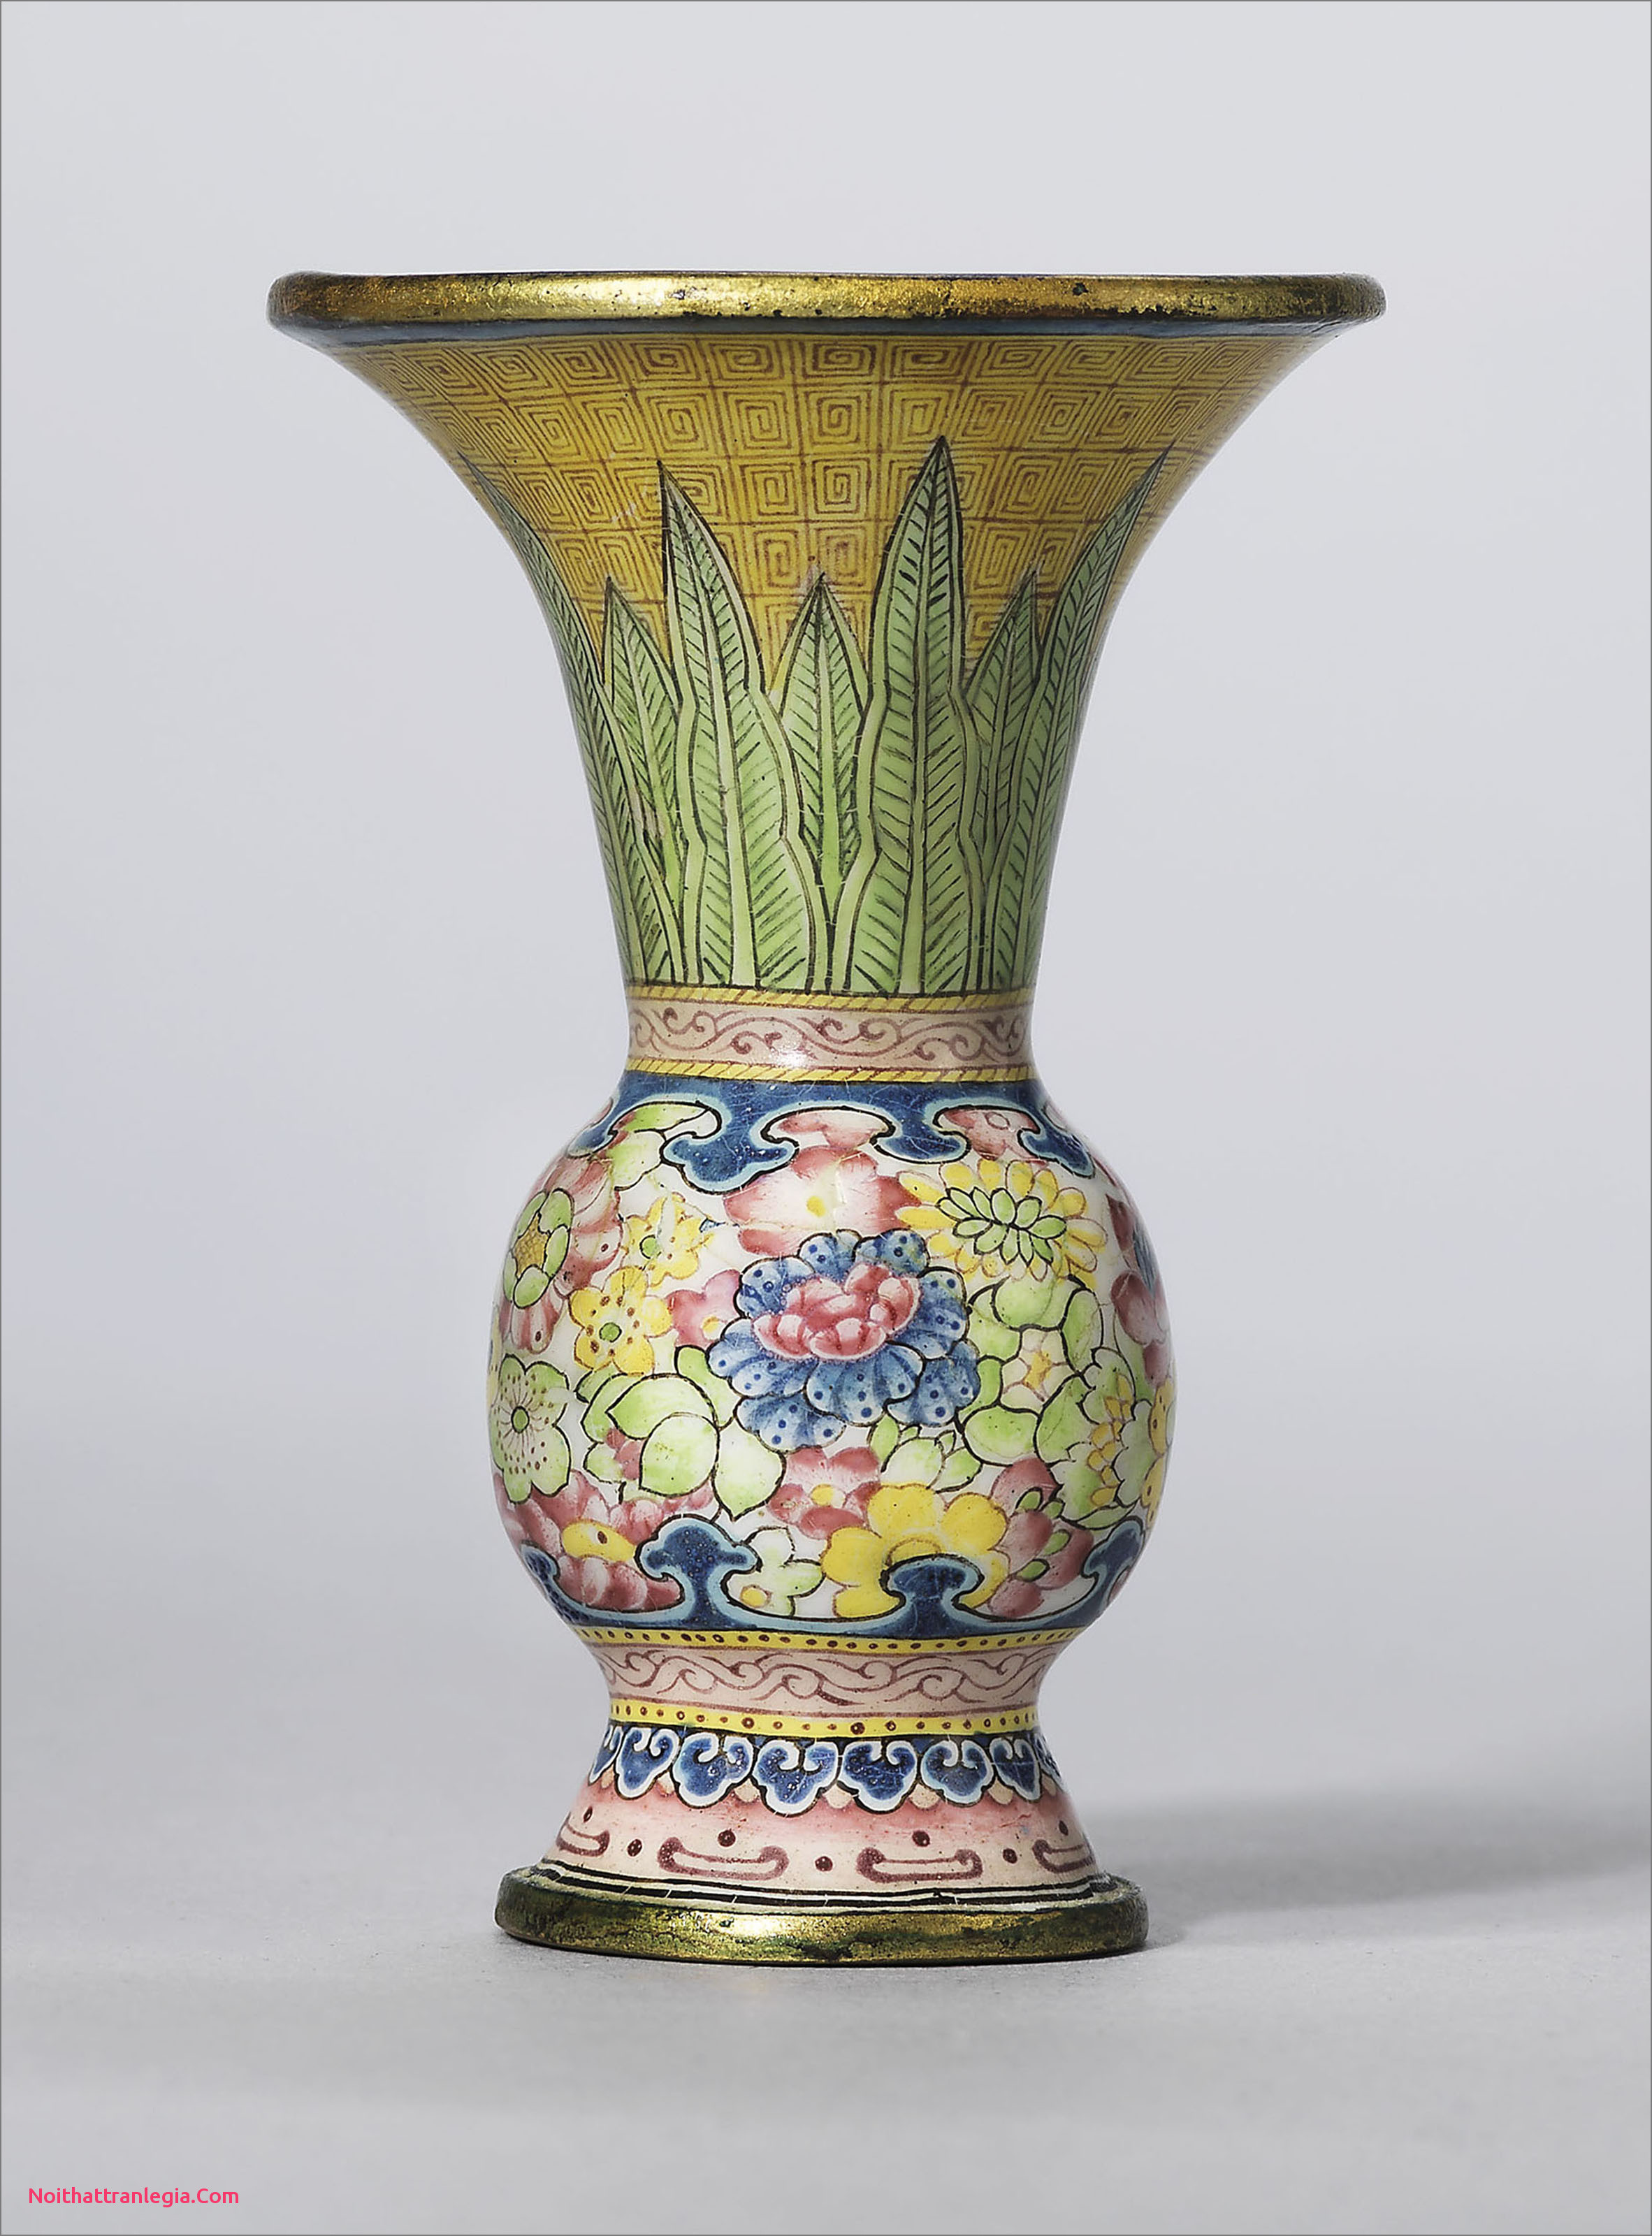 21 Awesome Waterford Blue Vase 2024 free download waterford blue vase of 20 chinese antique vase noithattranlegia vases design with a rare painted enamel gu shaped miniature vase qianlong four character mark in